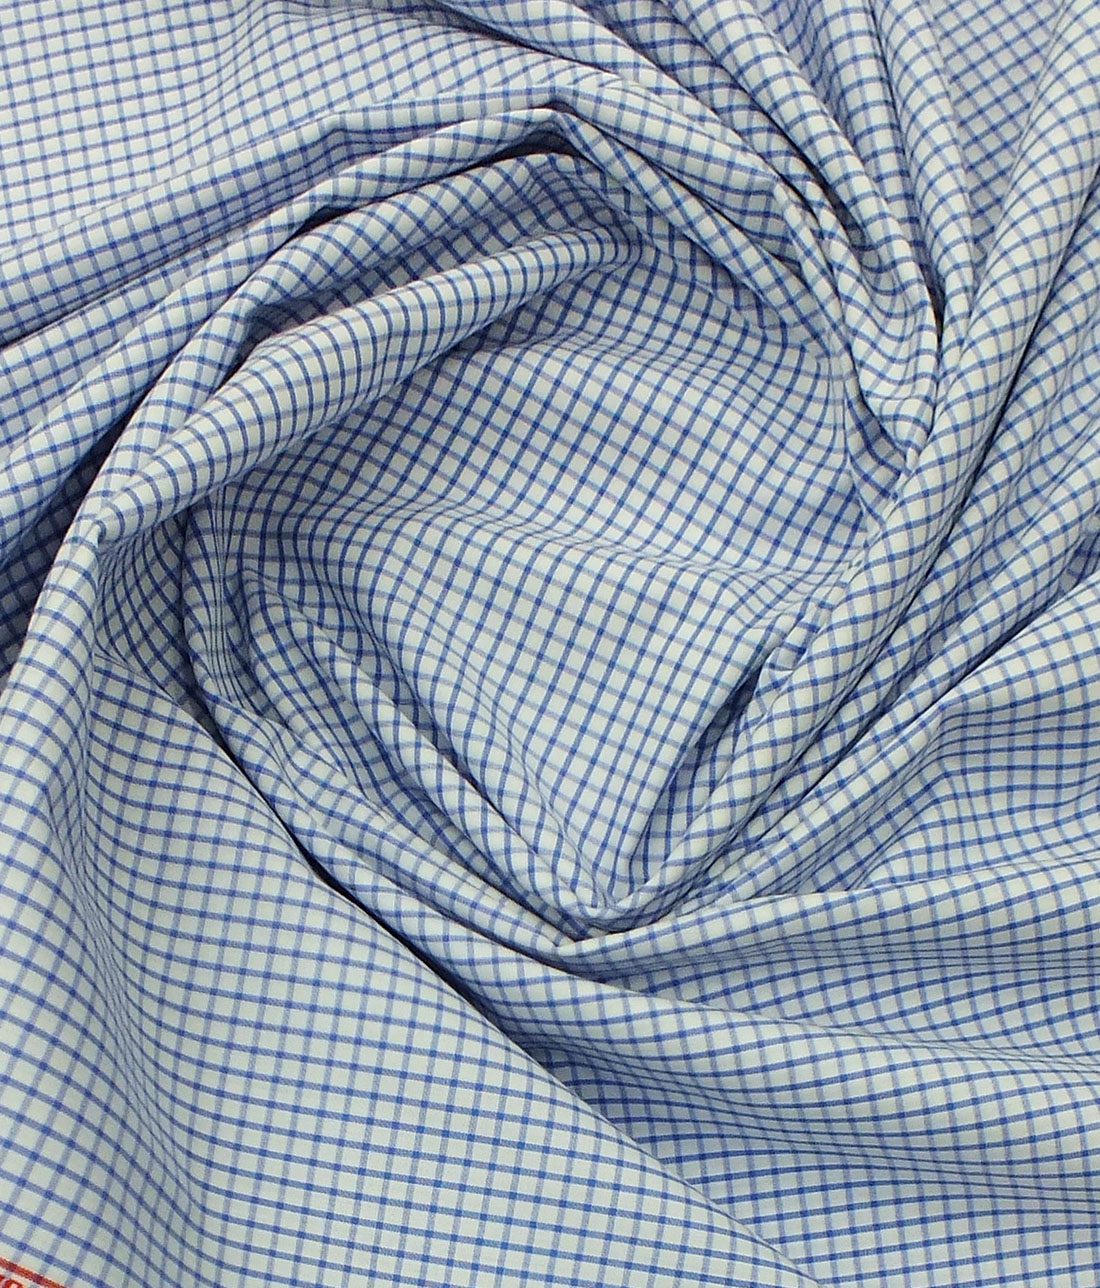 Raymond Royal Blue Structured Trouser Fabric With F.M. Hammerle White base Blue Checks Shirt Fabric (Unstitched)